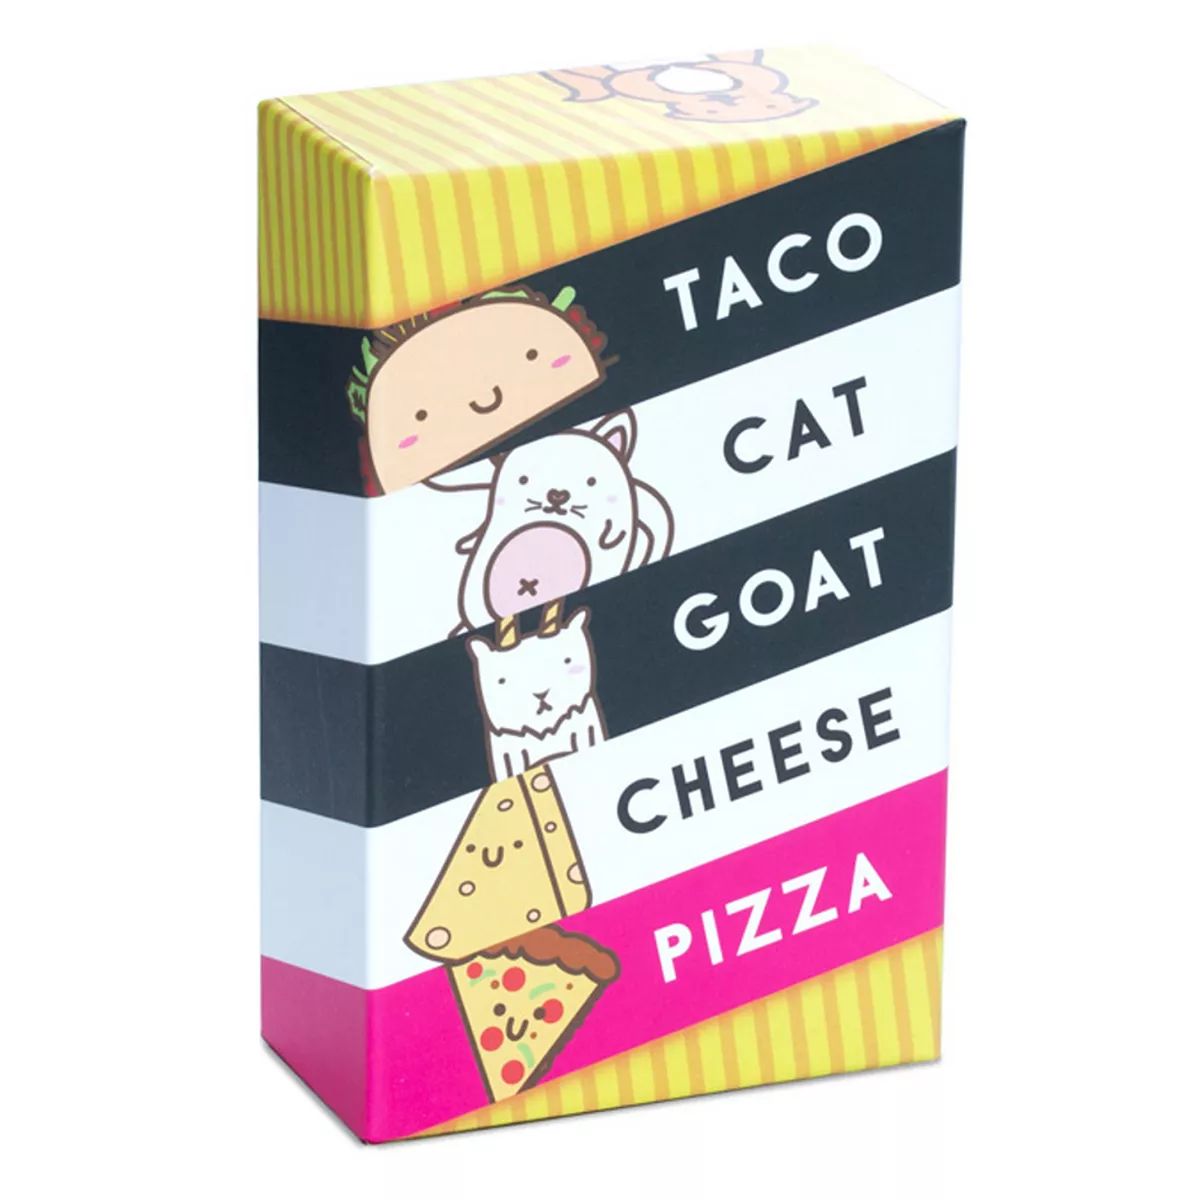 Taco Cat Goat Cheese Pizza Card Game by Dolphin Hat Games | Kohl's